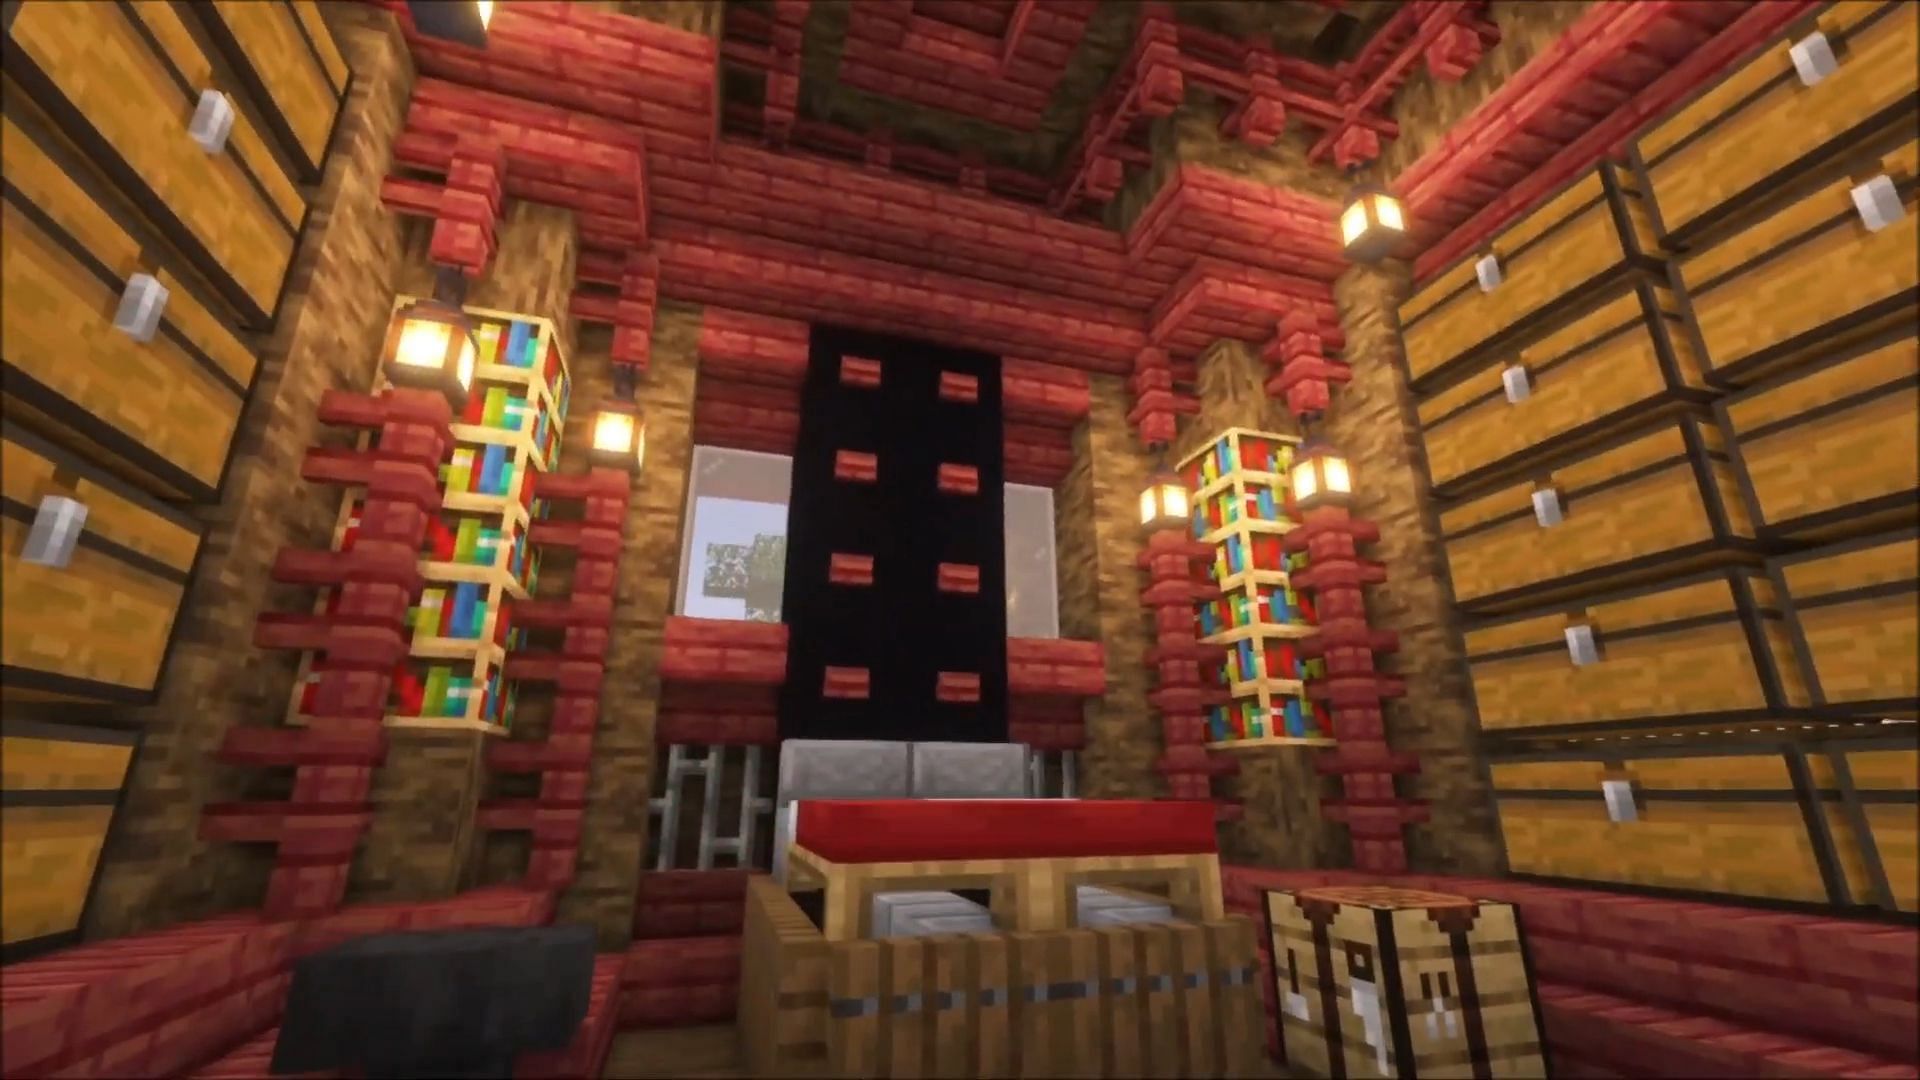 Mangrove wood is used to fantastic effect in this interior (Image via IT-TVGaming/YouTube)